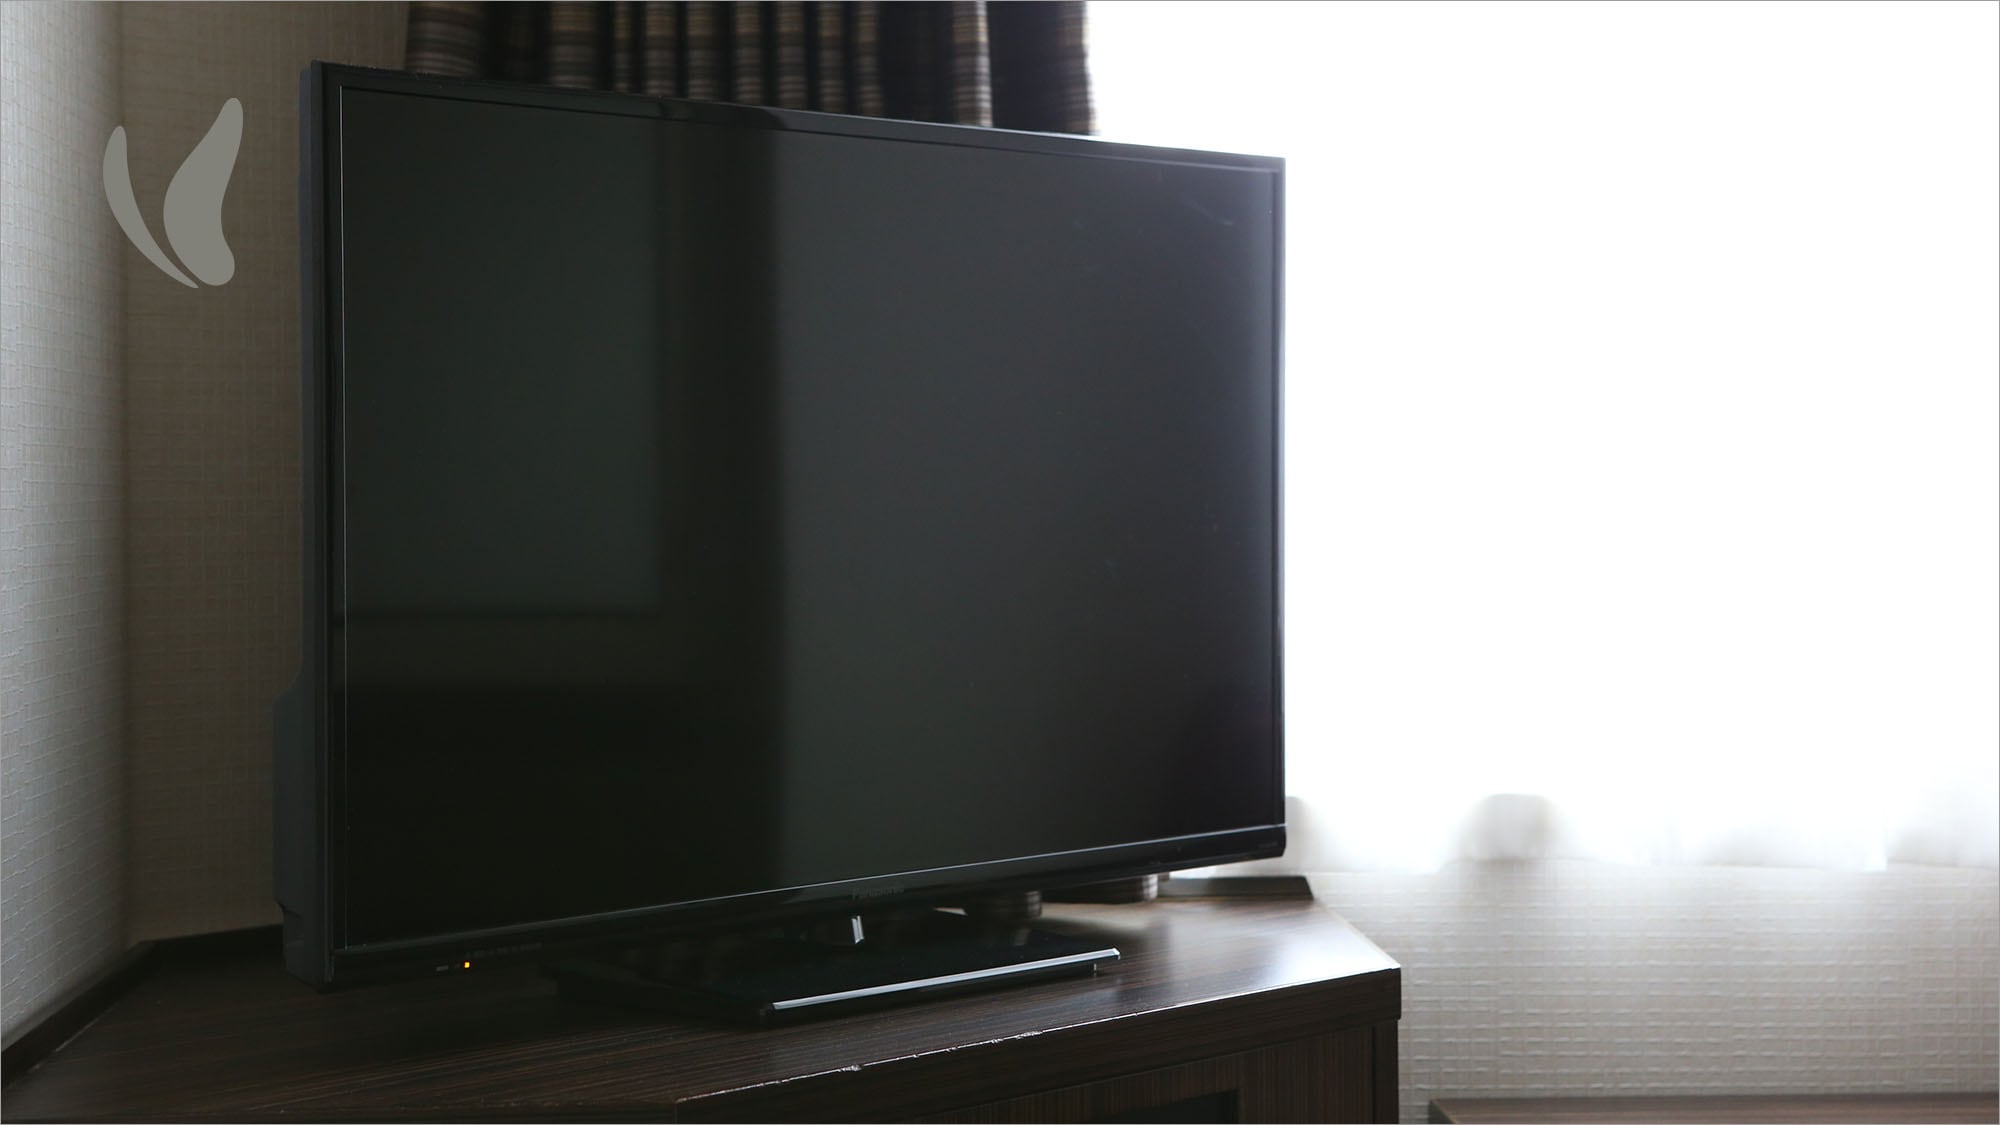 BS LCD TVs compatible with terrestrial digital broadcasting are installed in all rooms